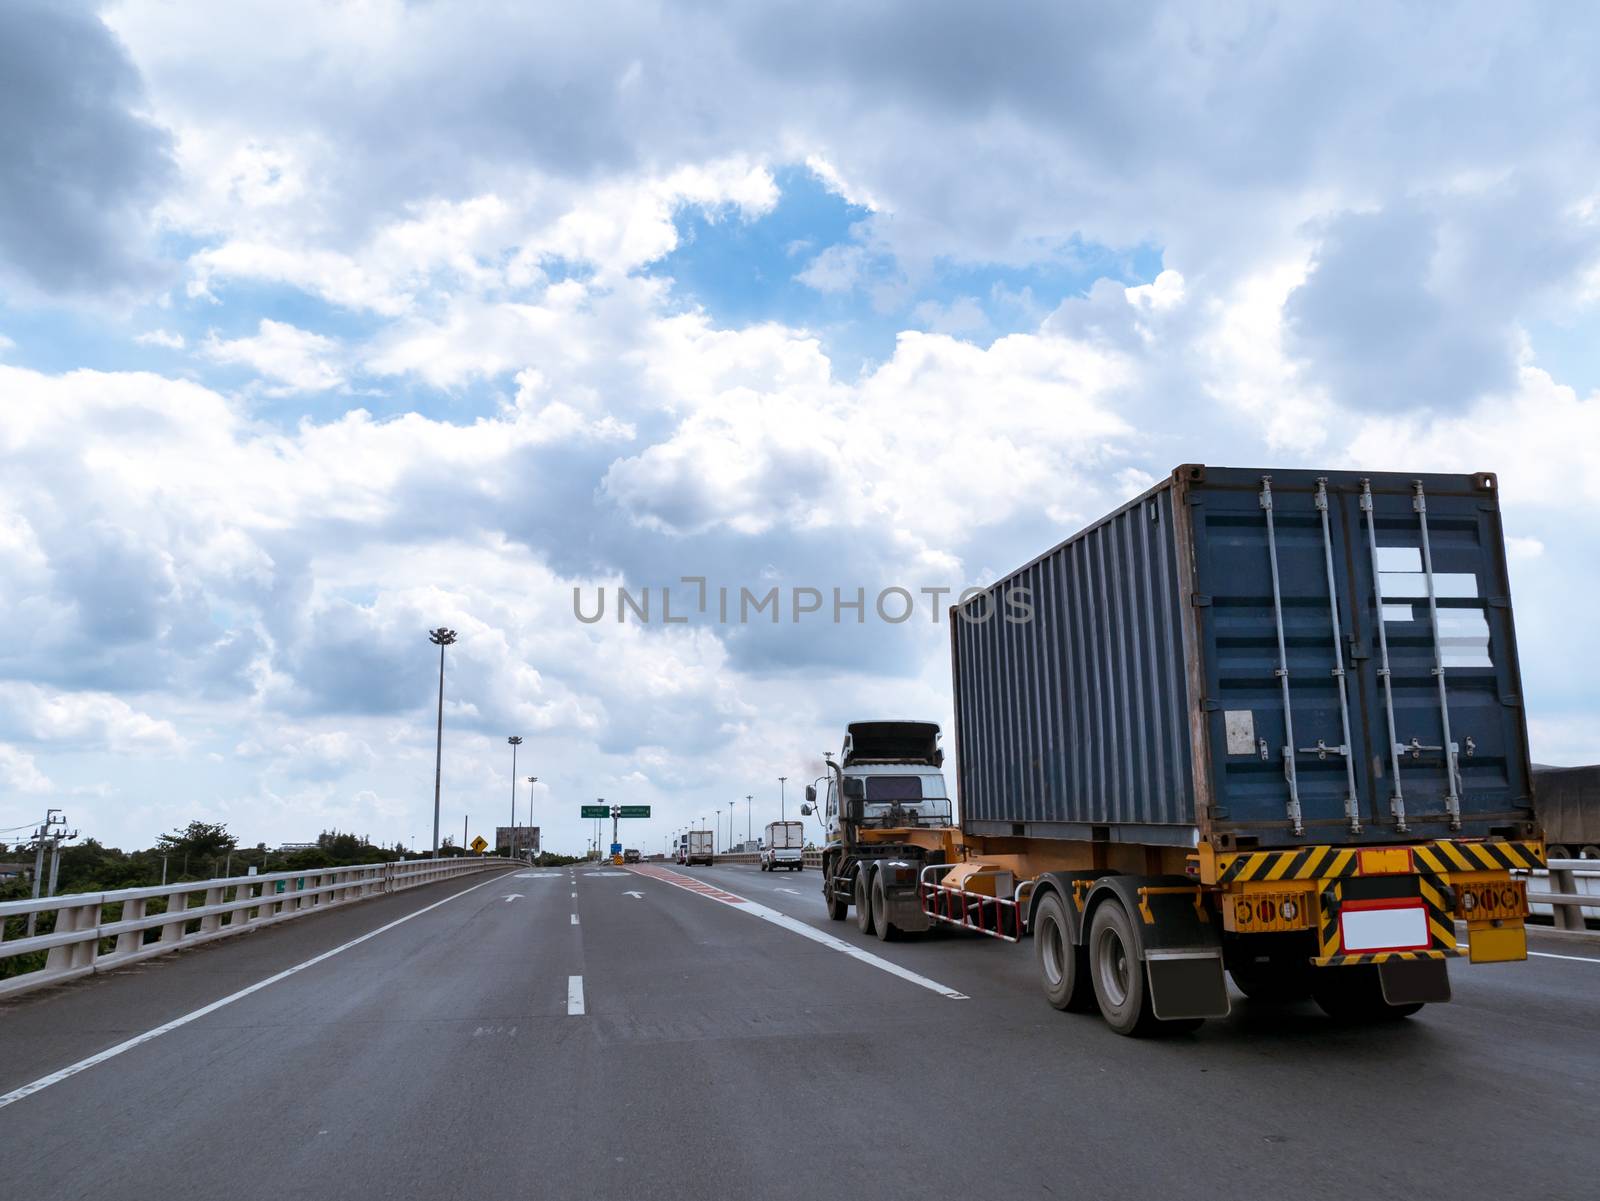 logistic container truck on highway by antpkr